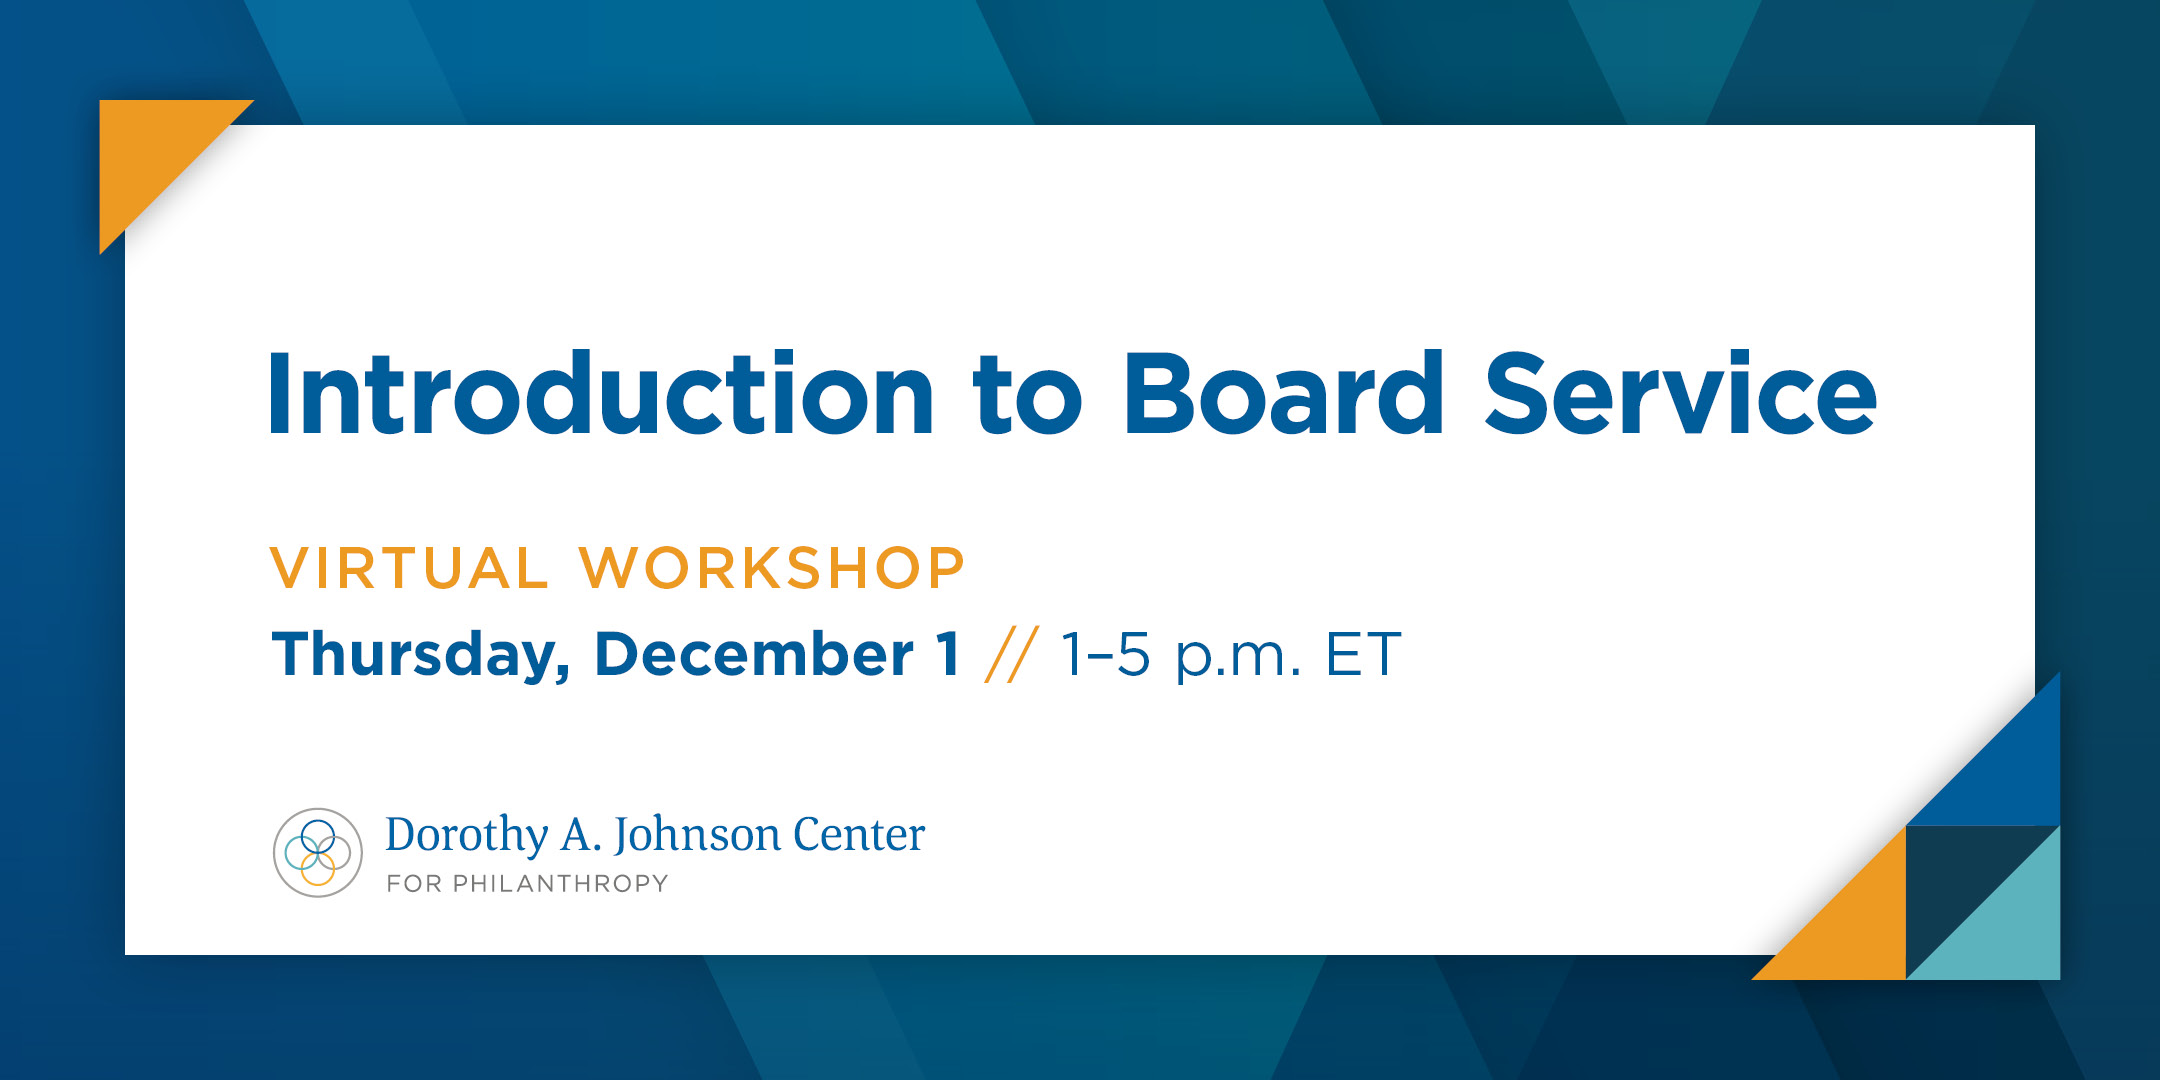 Introduction to Board Service